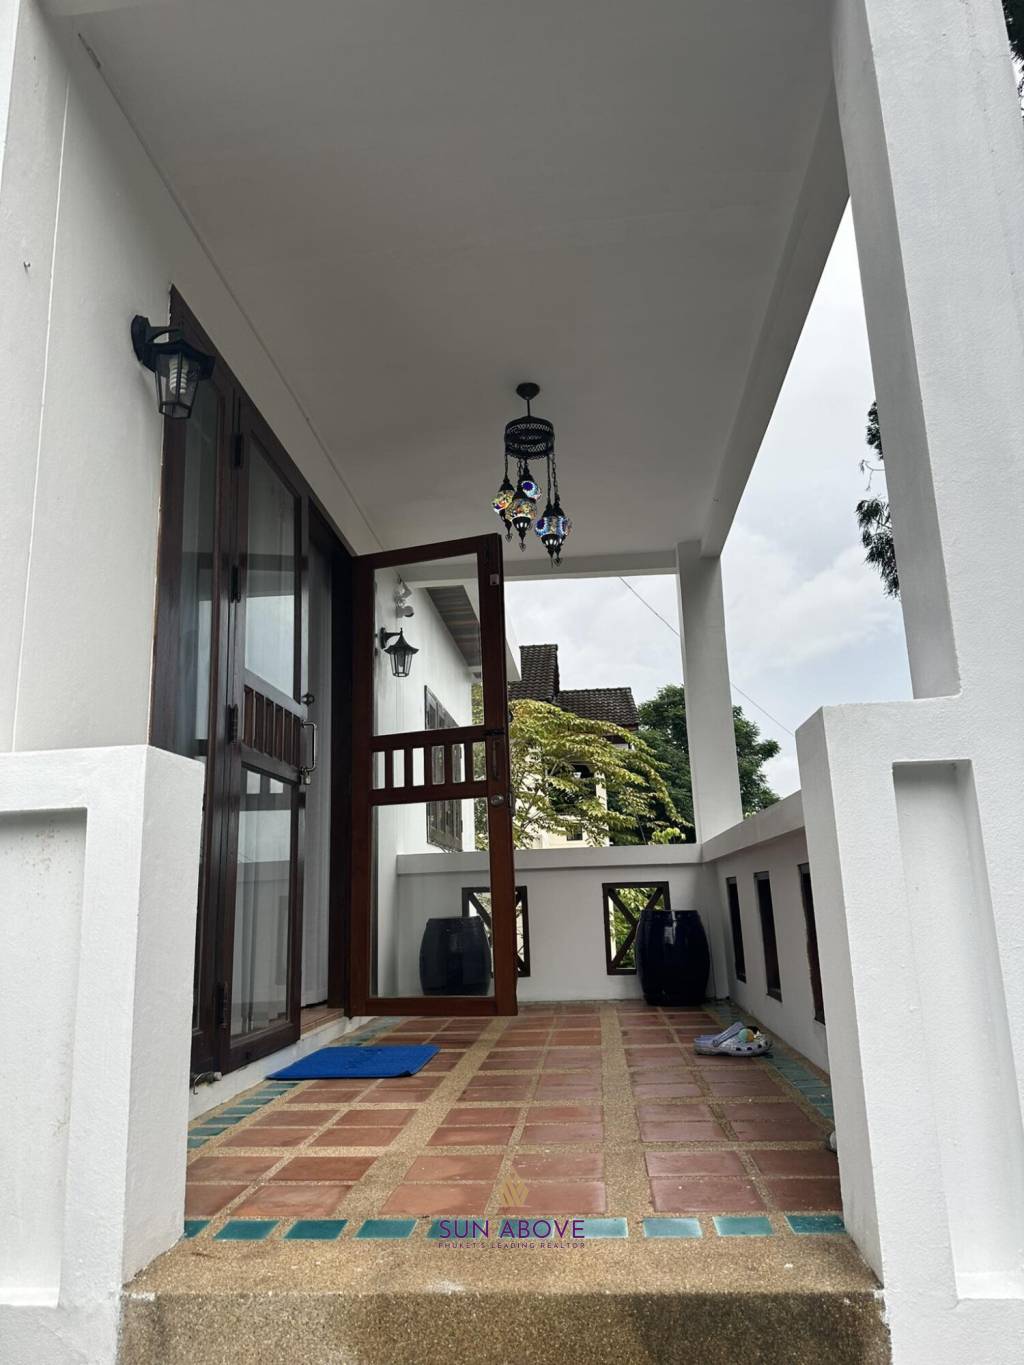 Exceptional 3-Bedroom House for Sale in Phuket Located in Talat Yai, Phuket Town